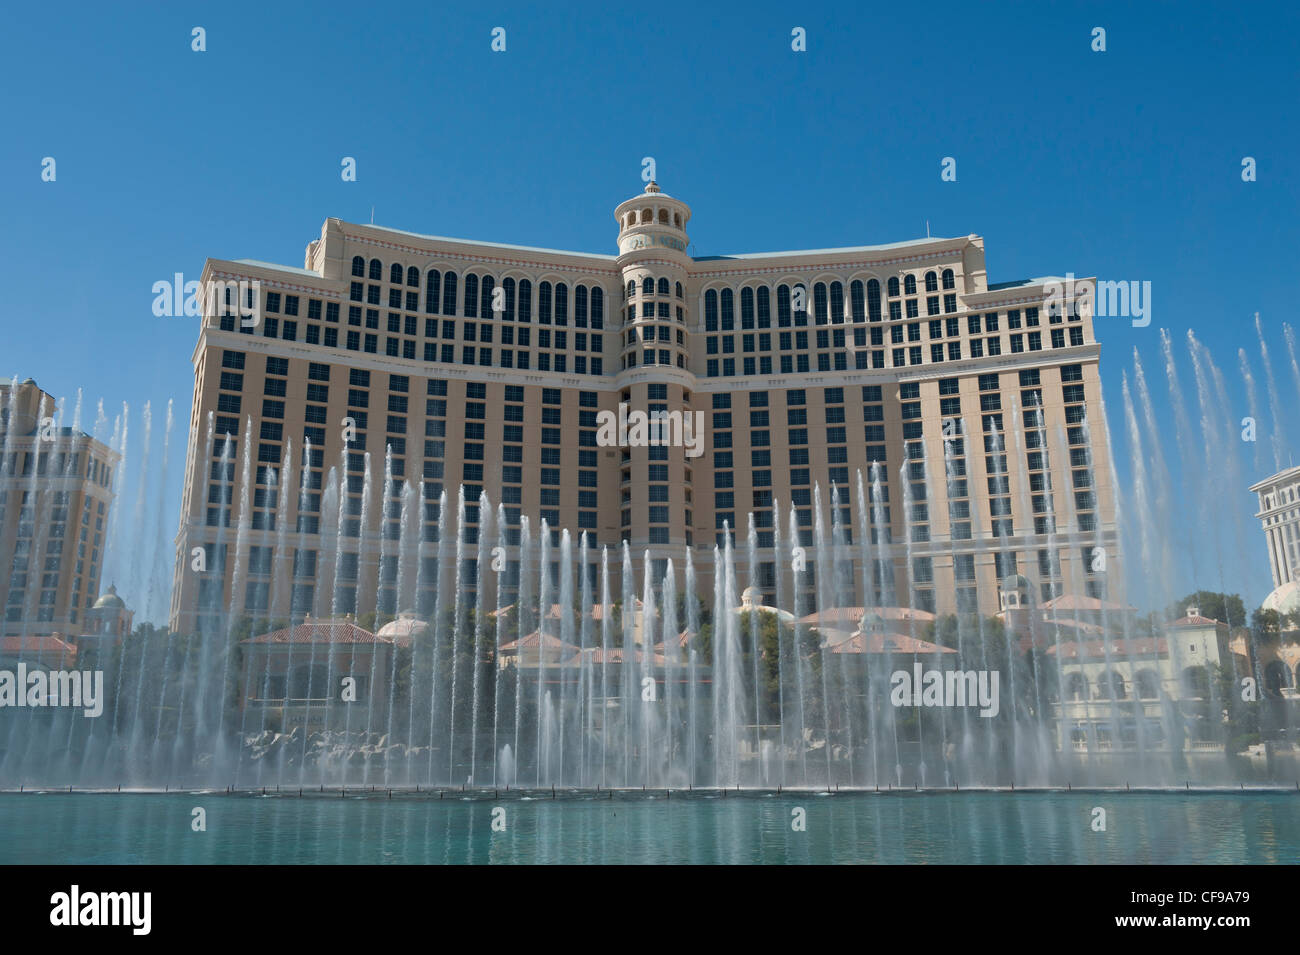 The Spectacular Bellagio Fountains in the Day, Las Vegas, USA Stock Photo